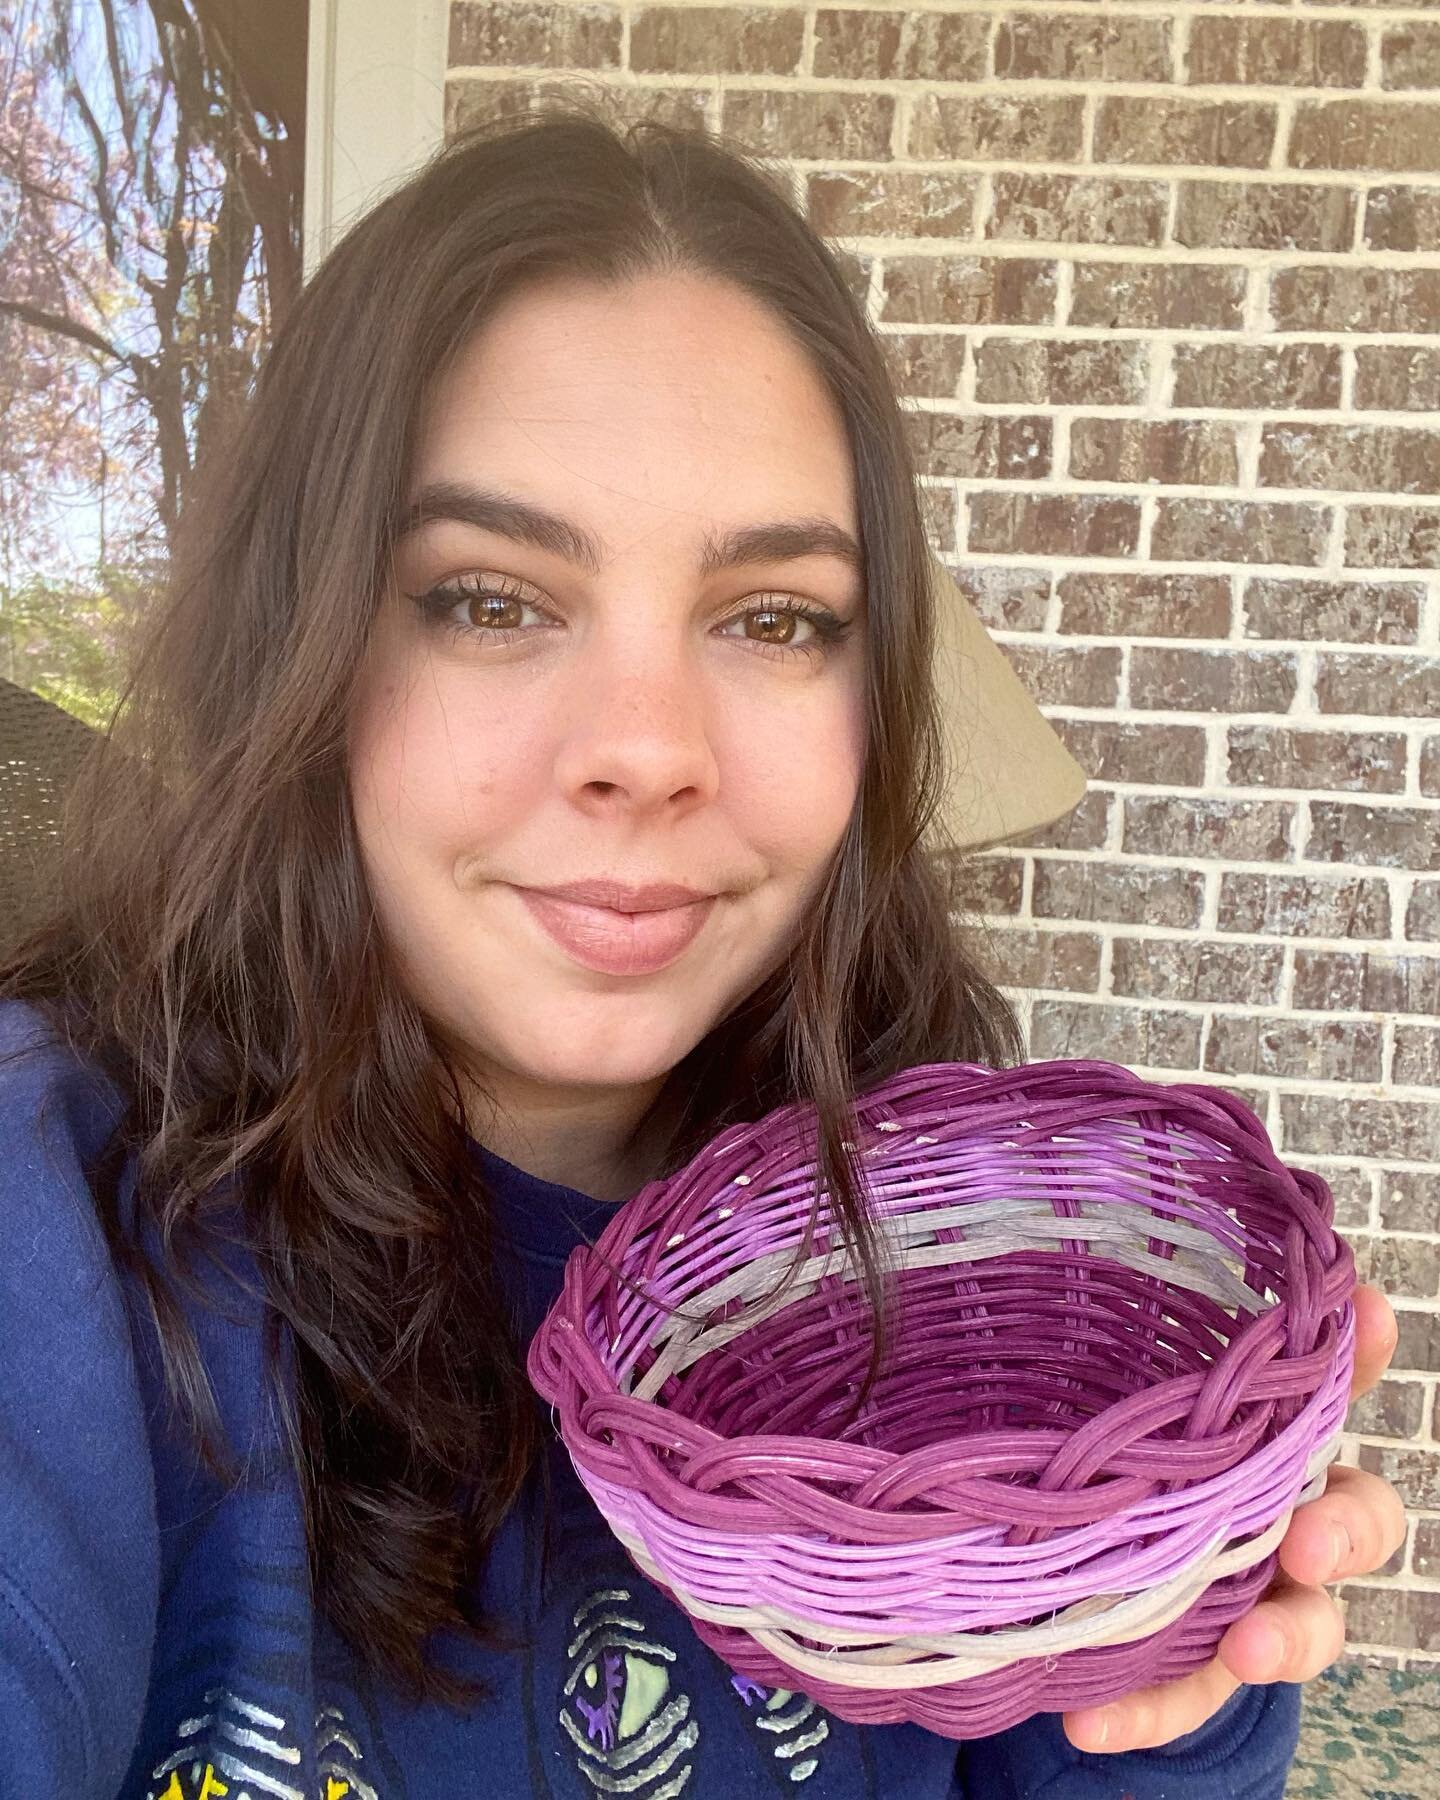 Saturday at my pop up I got to sell art, drink awesome beer, and weave this basket. It was honestly a great way to welcome Spring and even the pollen couldn&rsquo;t ruin it. *Basket for sale: $35*